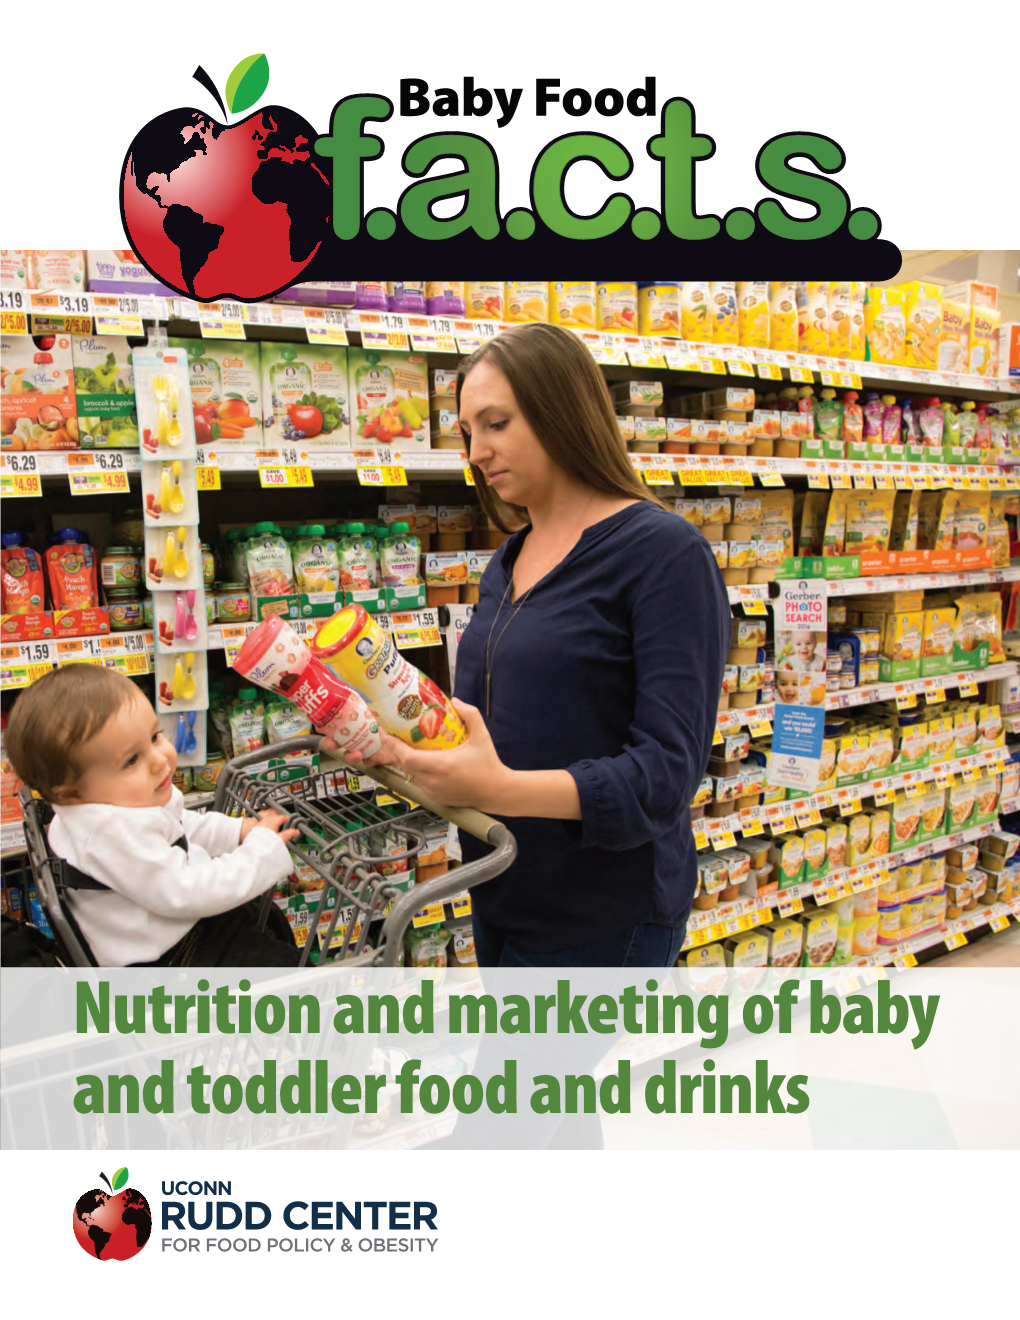 Baby Food FACTS. Nutrition and Marketing of Baby and Toddler Food